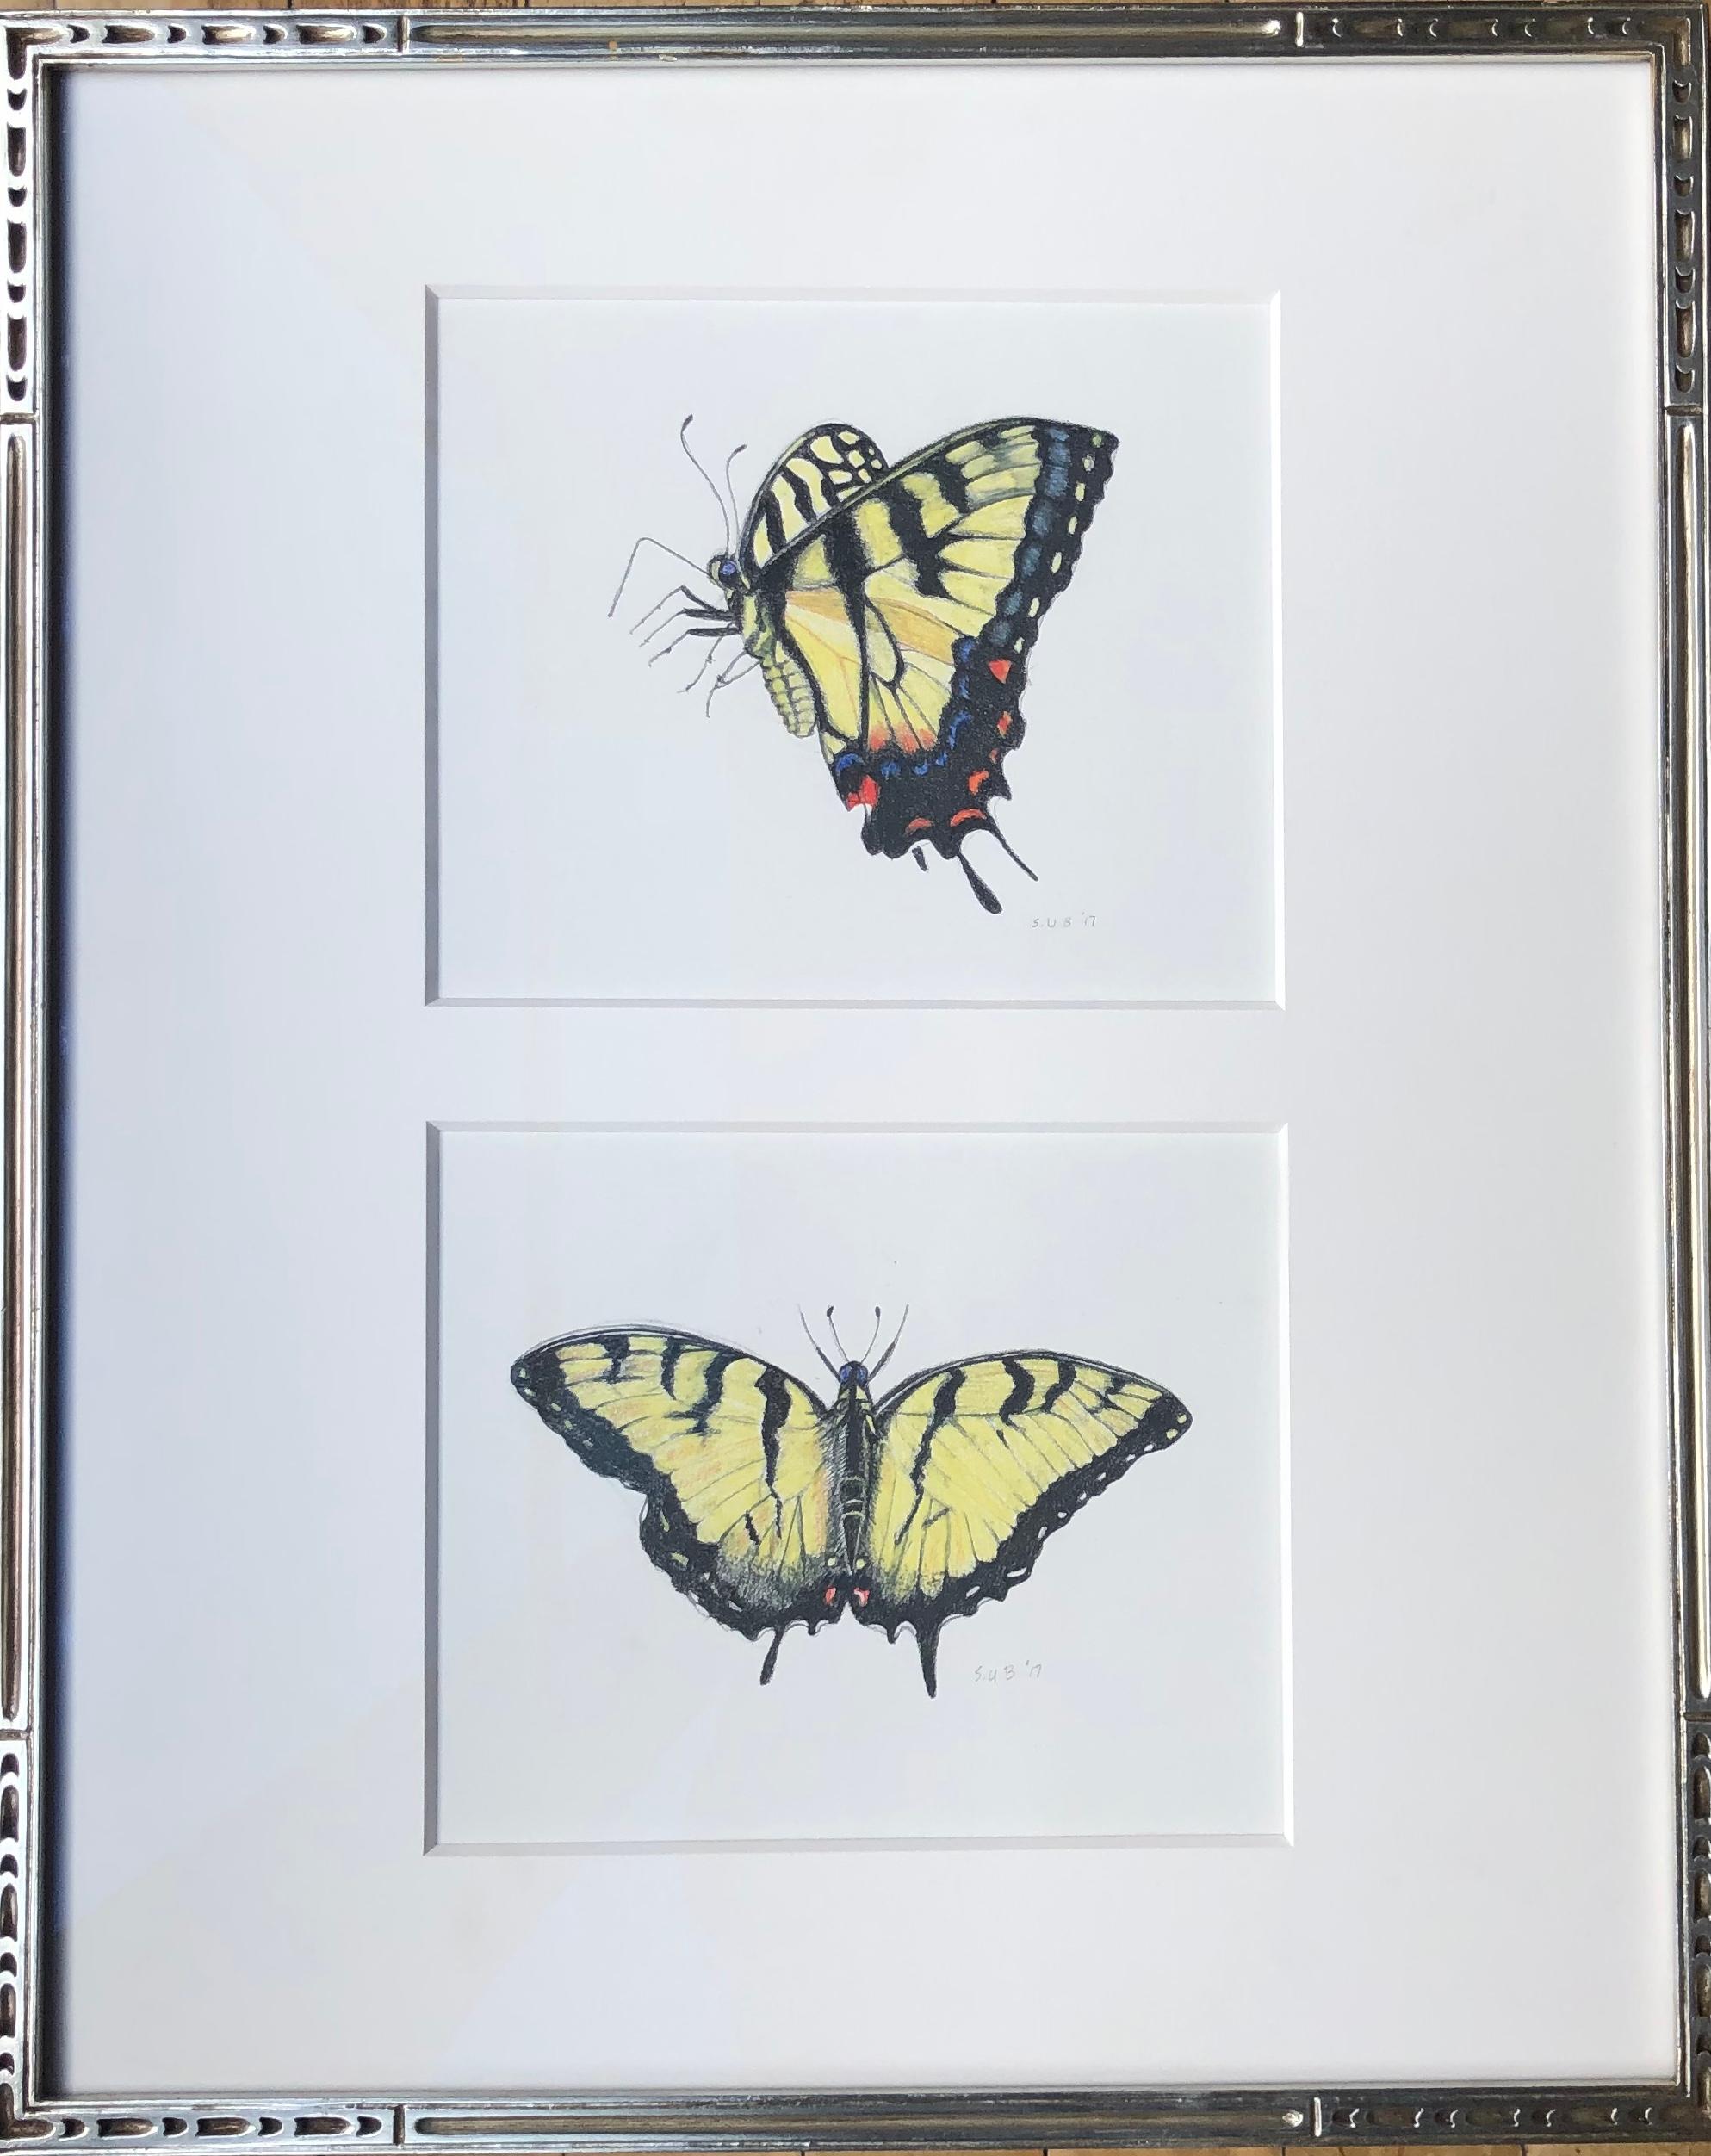 Sylvia Beckman Animal Art - Swallow Tails, Two Yellow Tiger Swallowtail Butterflies, Color Pencil, Framed